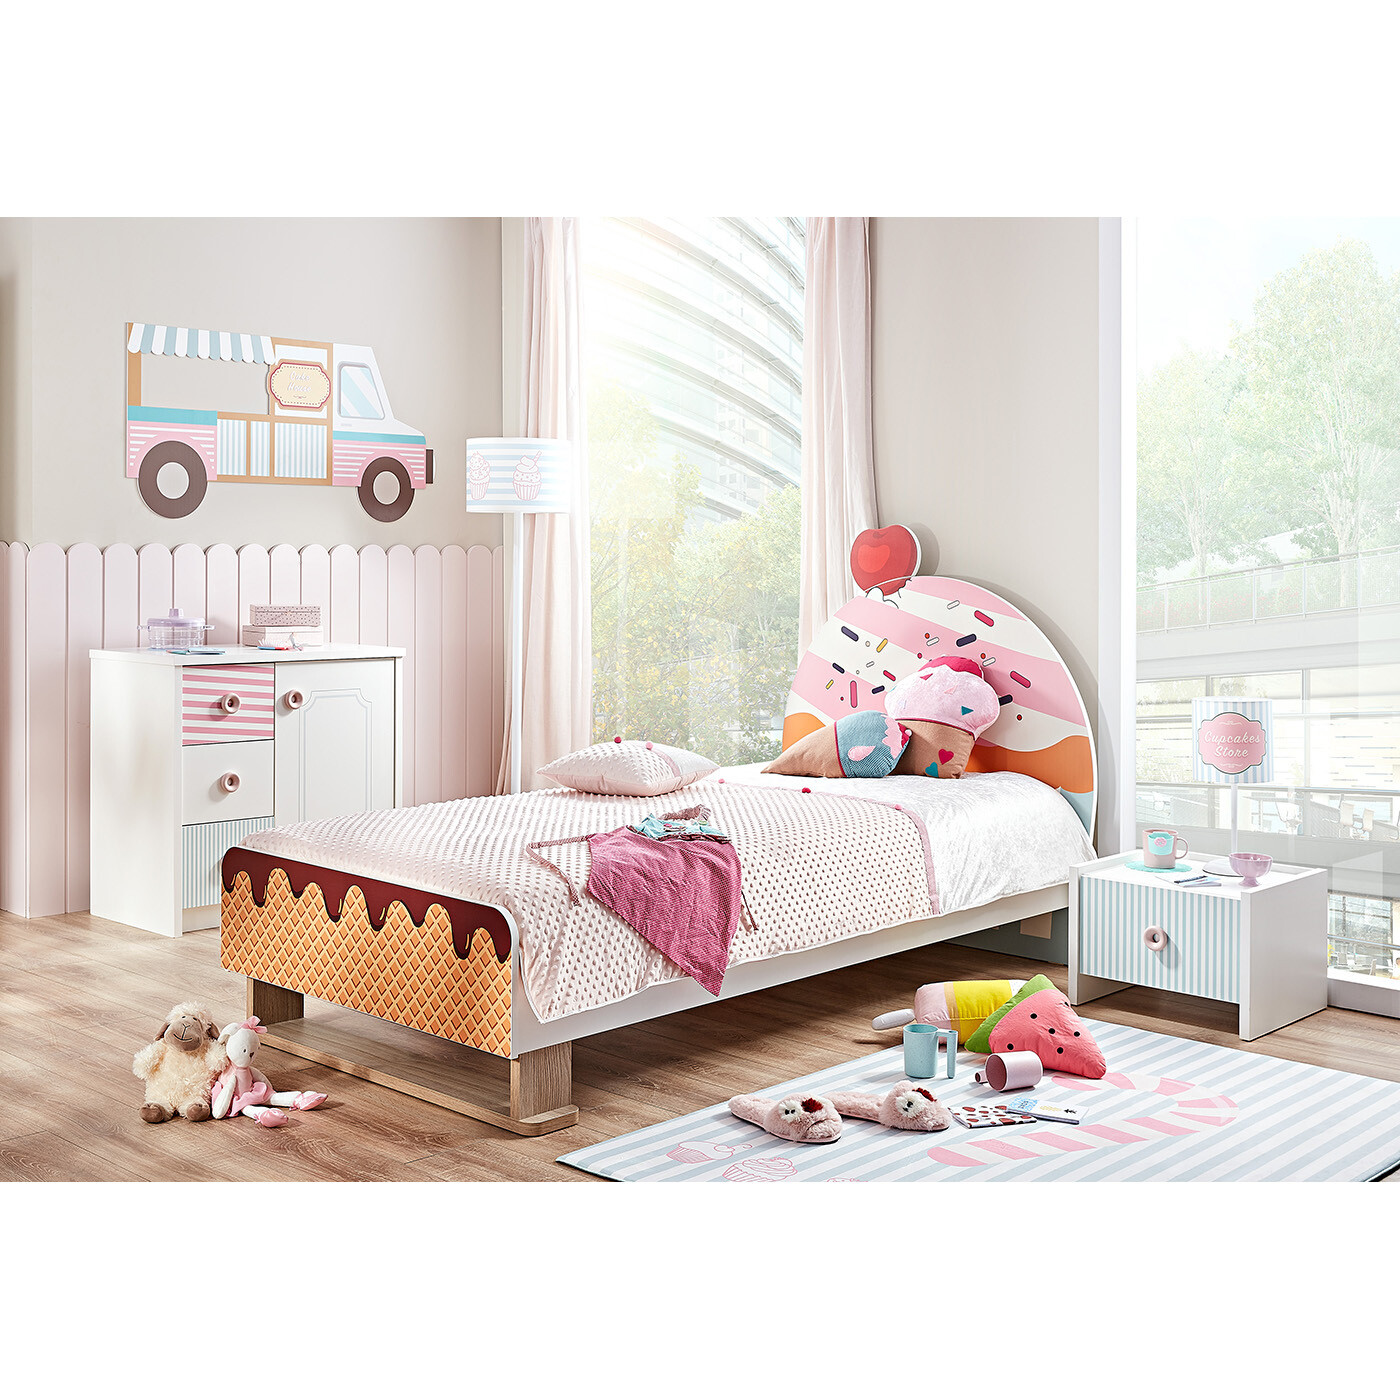 Cake House Single Bed for Kids